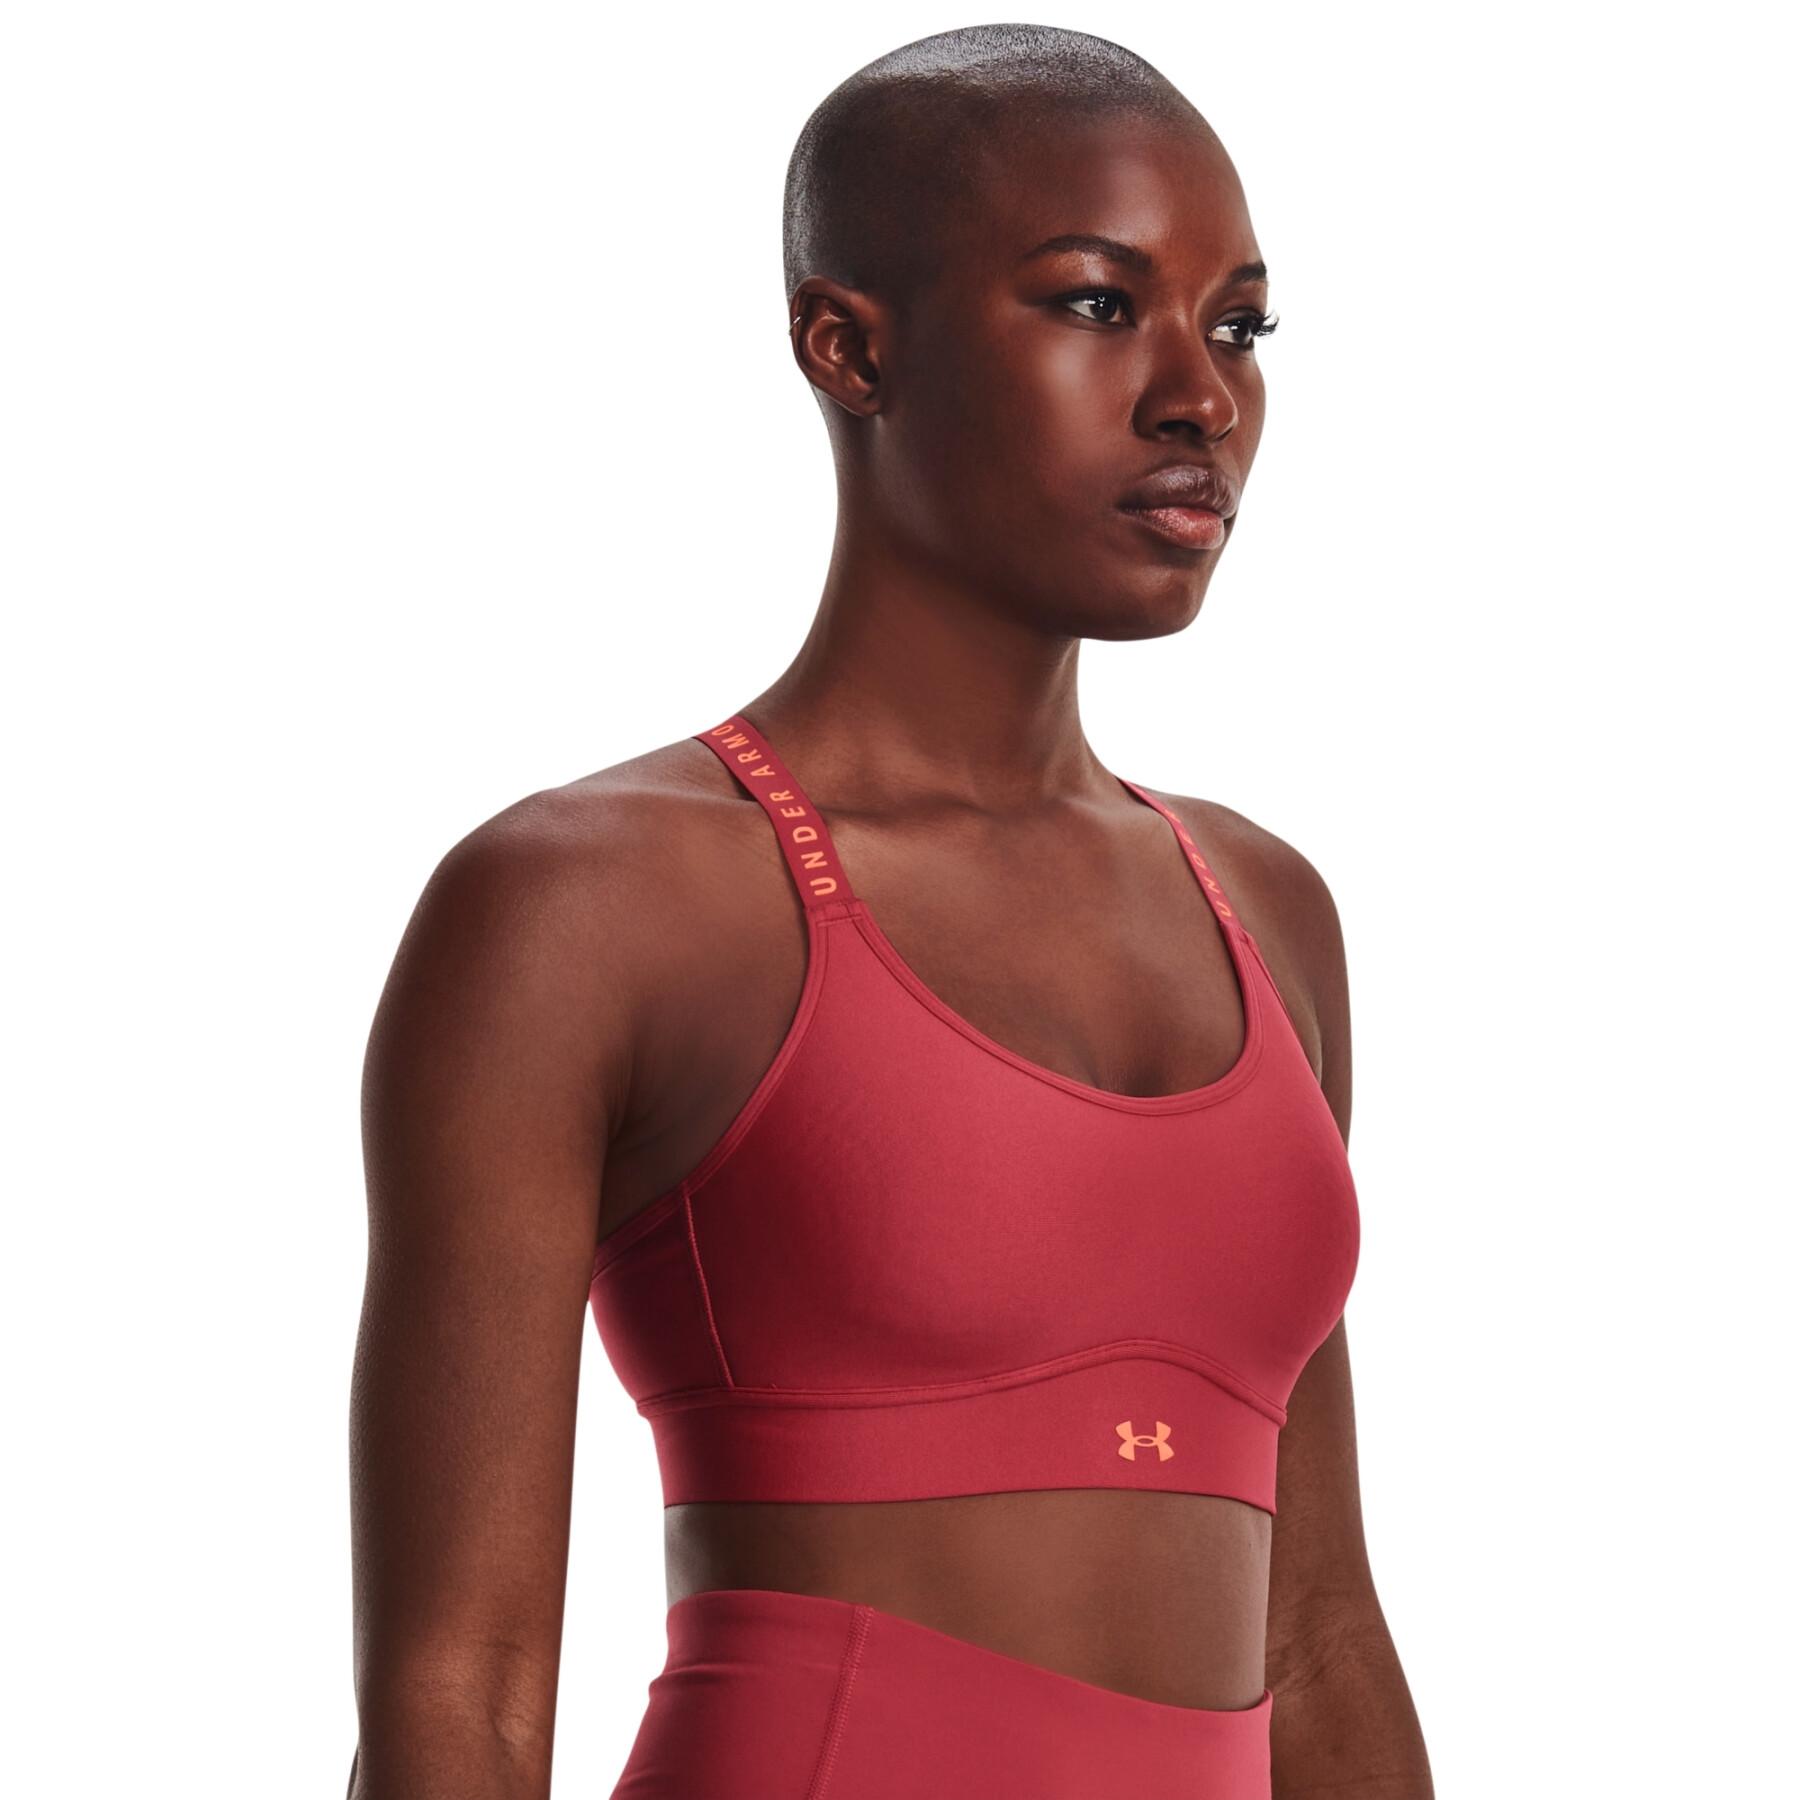 Women's bra Under Armour Infinity Covered Impact - Bras - Women's clothing  - Fitness